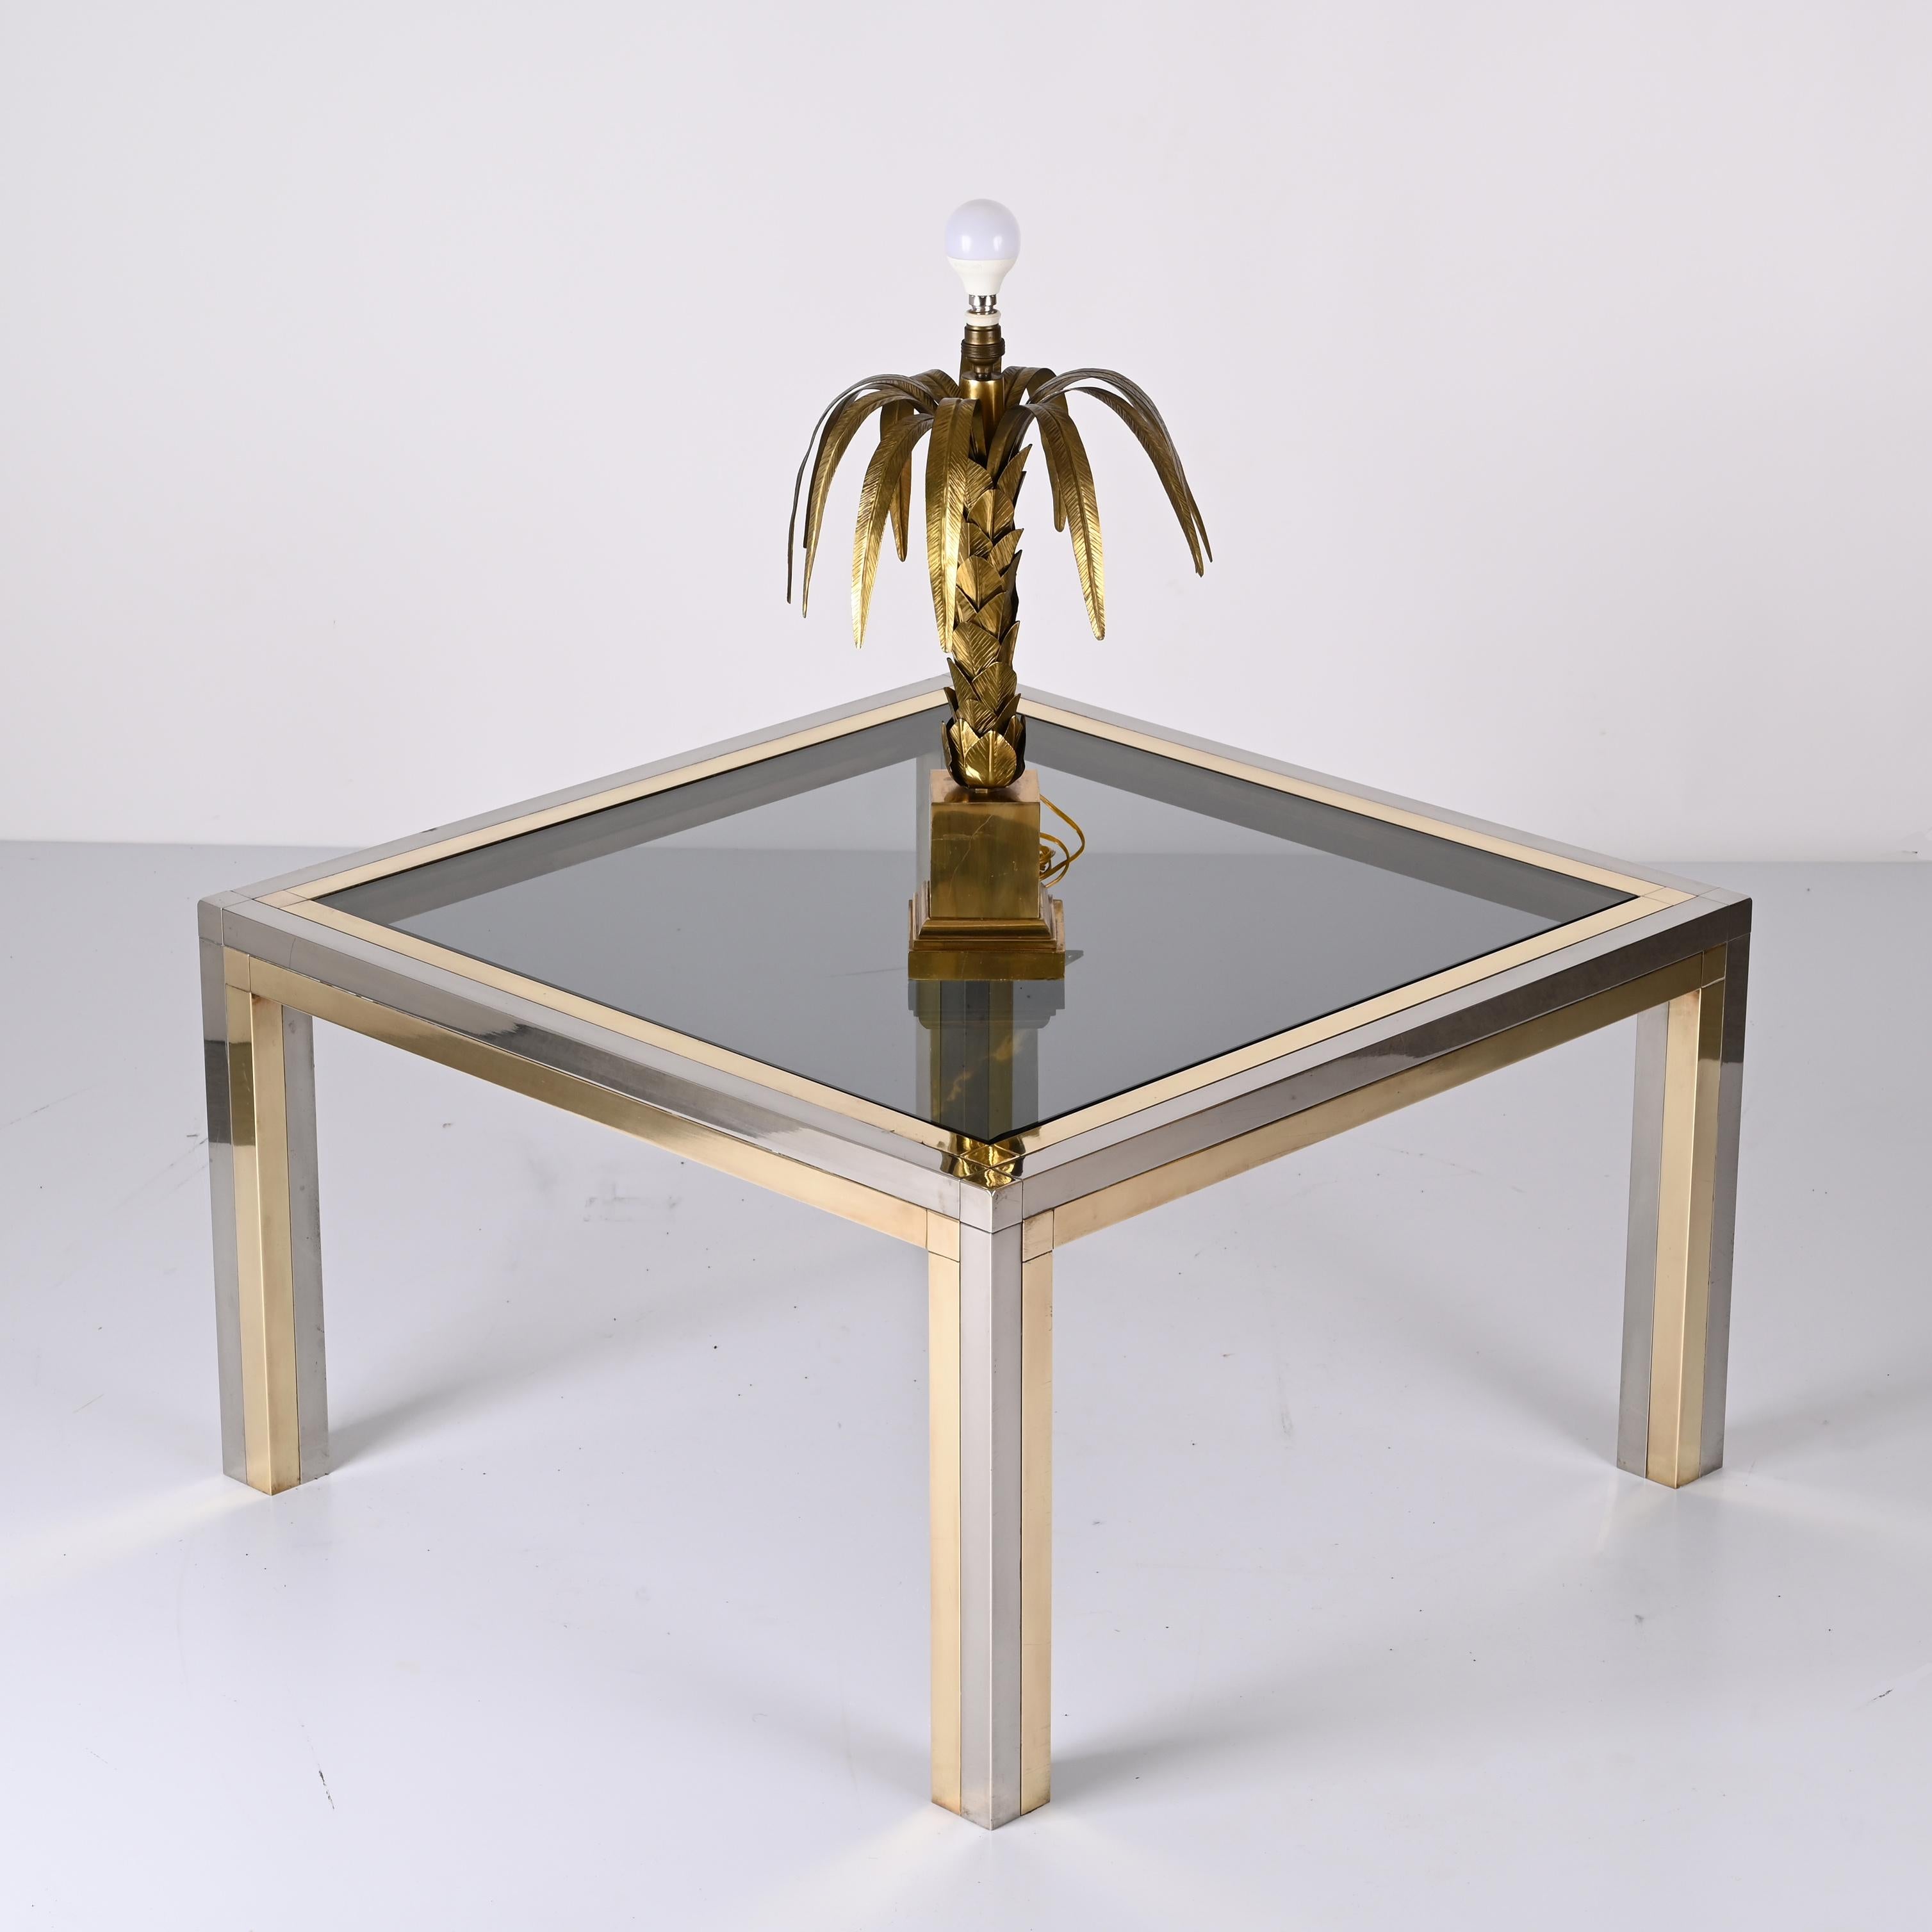 Romeo Rega Brass, Chrome and Smoked Glass Square Italian Coffee Table, 1970s For Sale 7